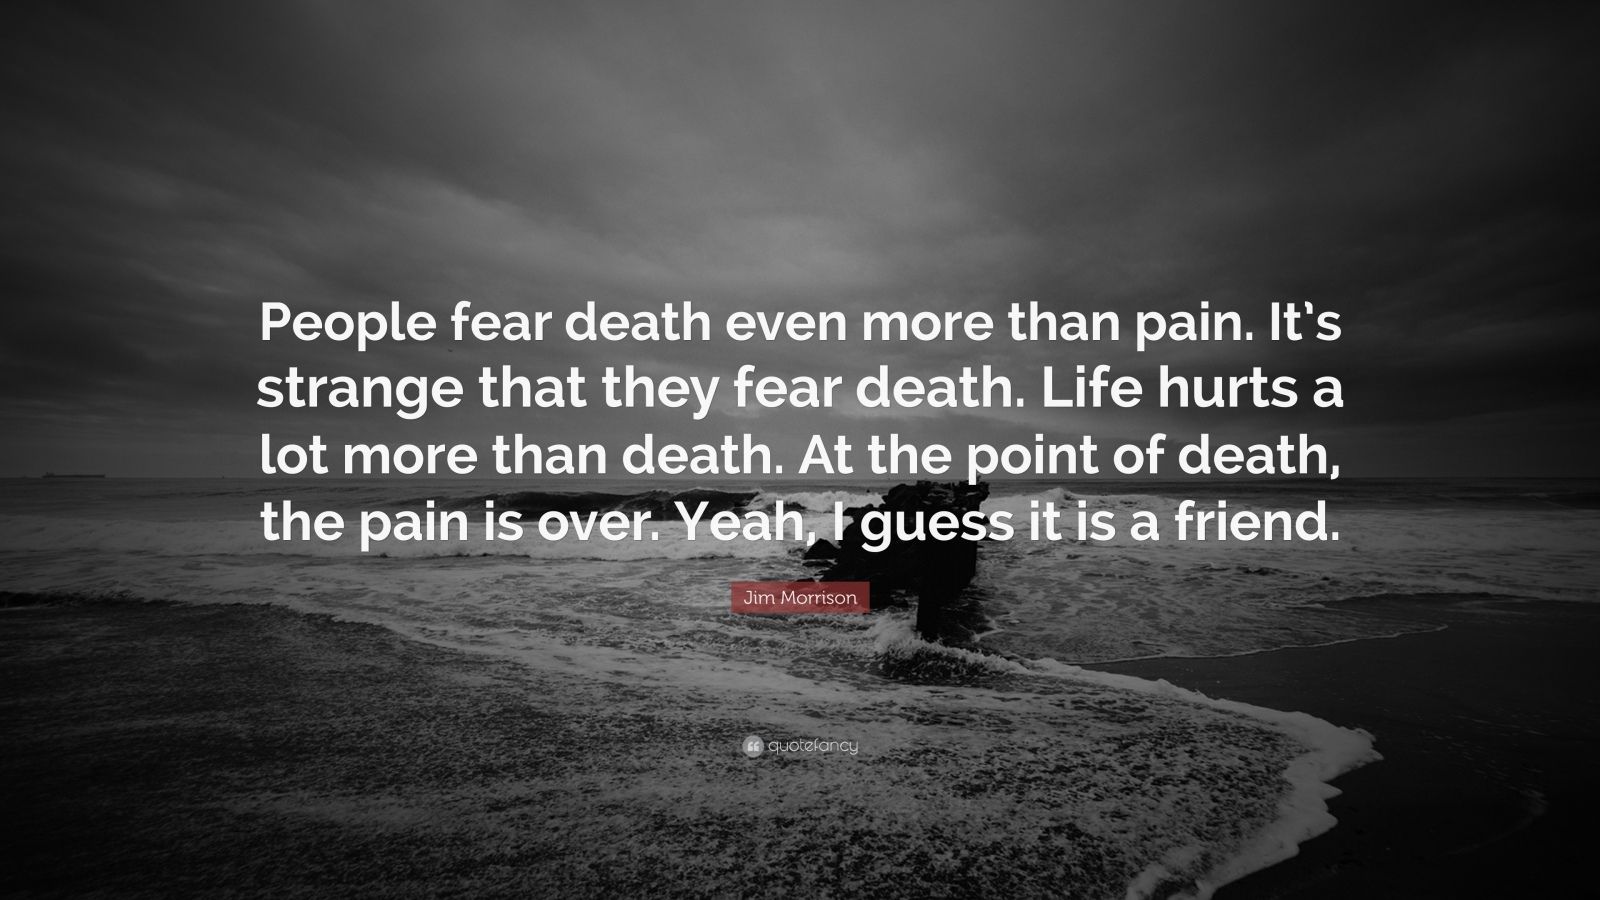 Jim Morrison Quote: “People fear death even more than pain. It's ...